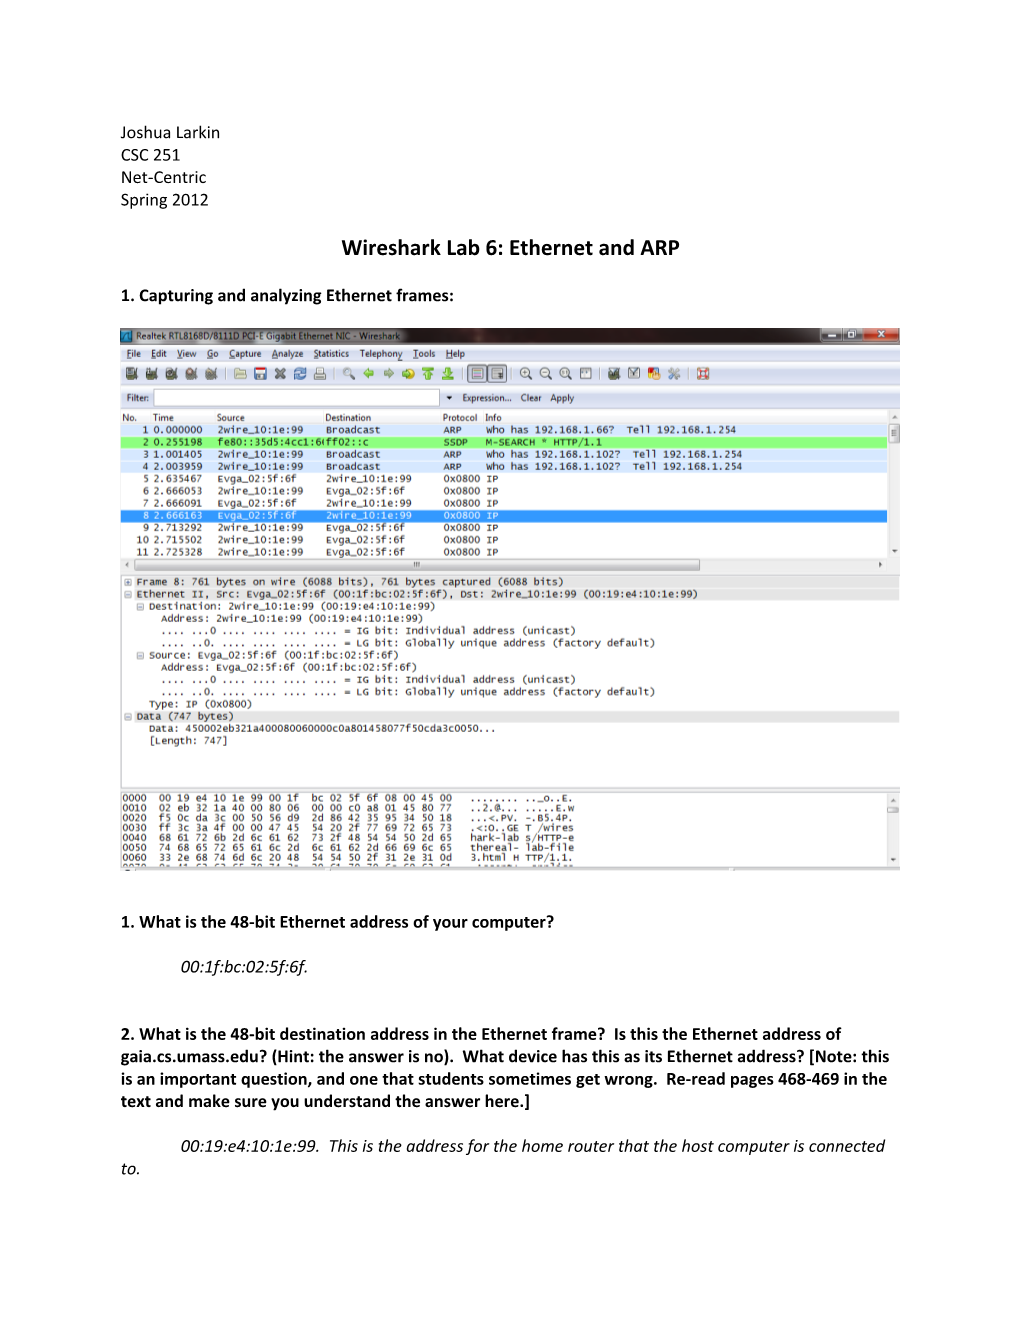 Wireshark Lab 6: Ethernet and ARP